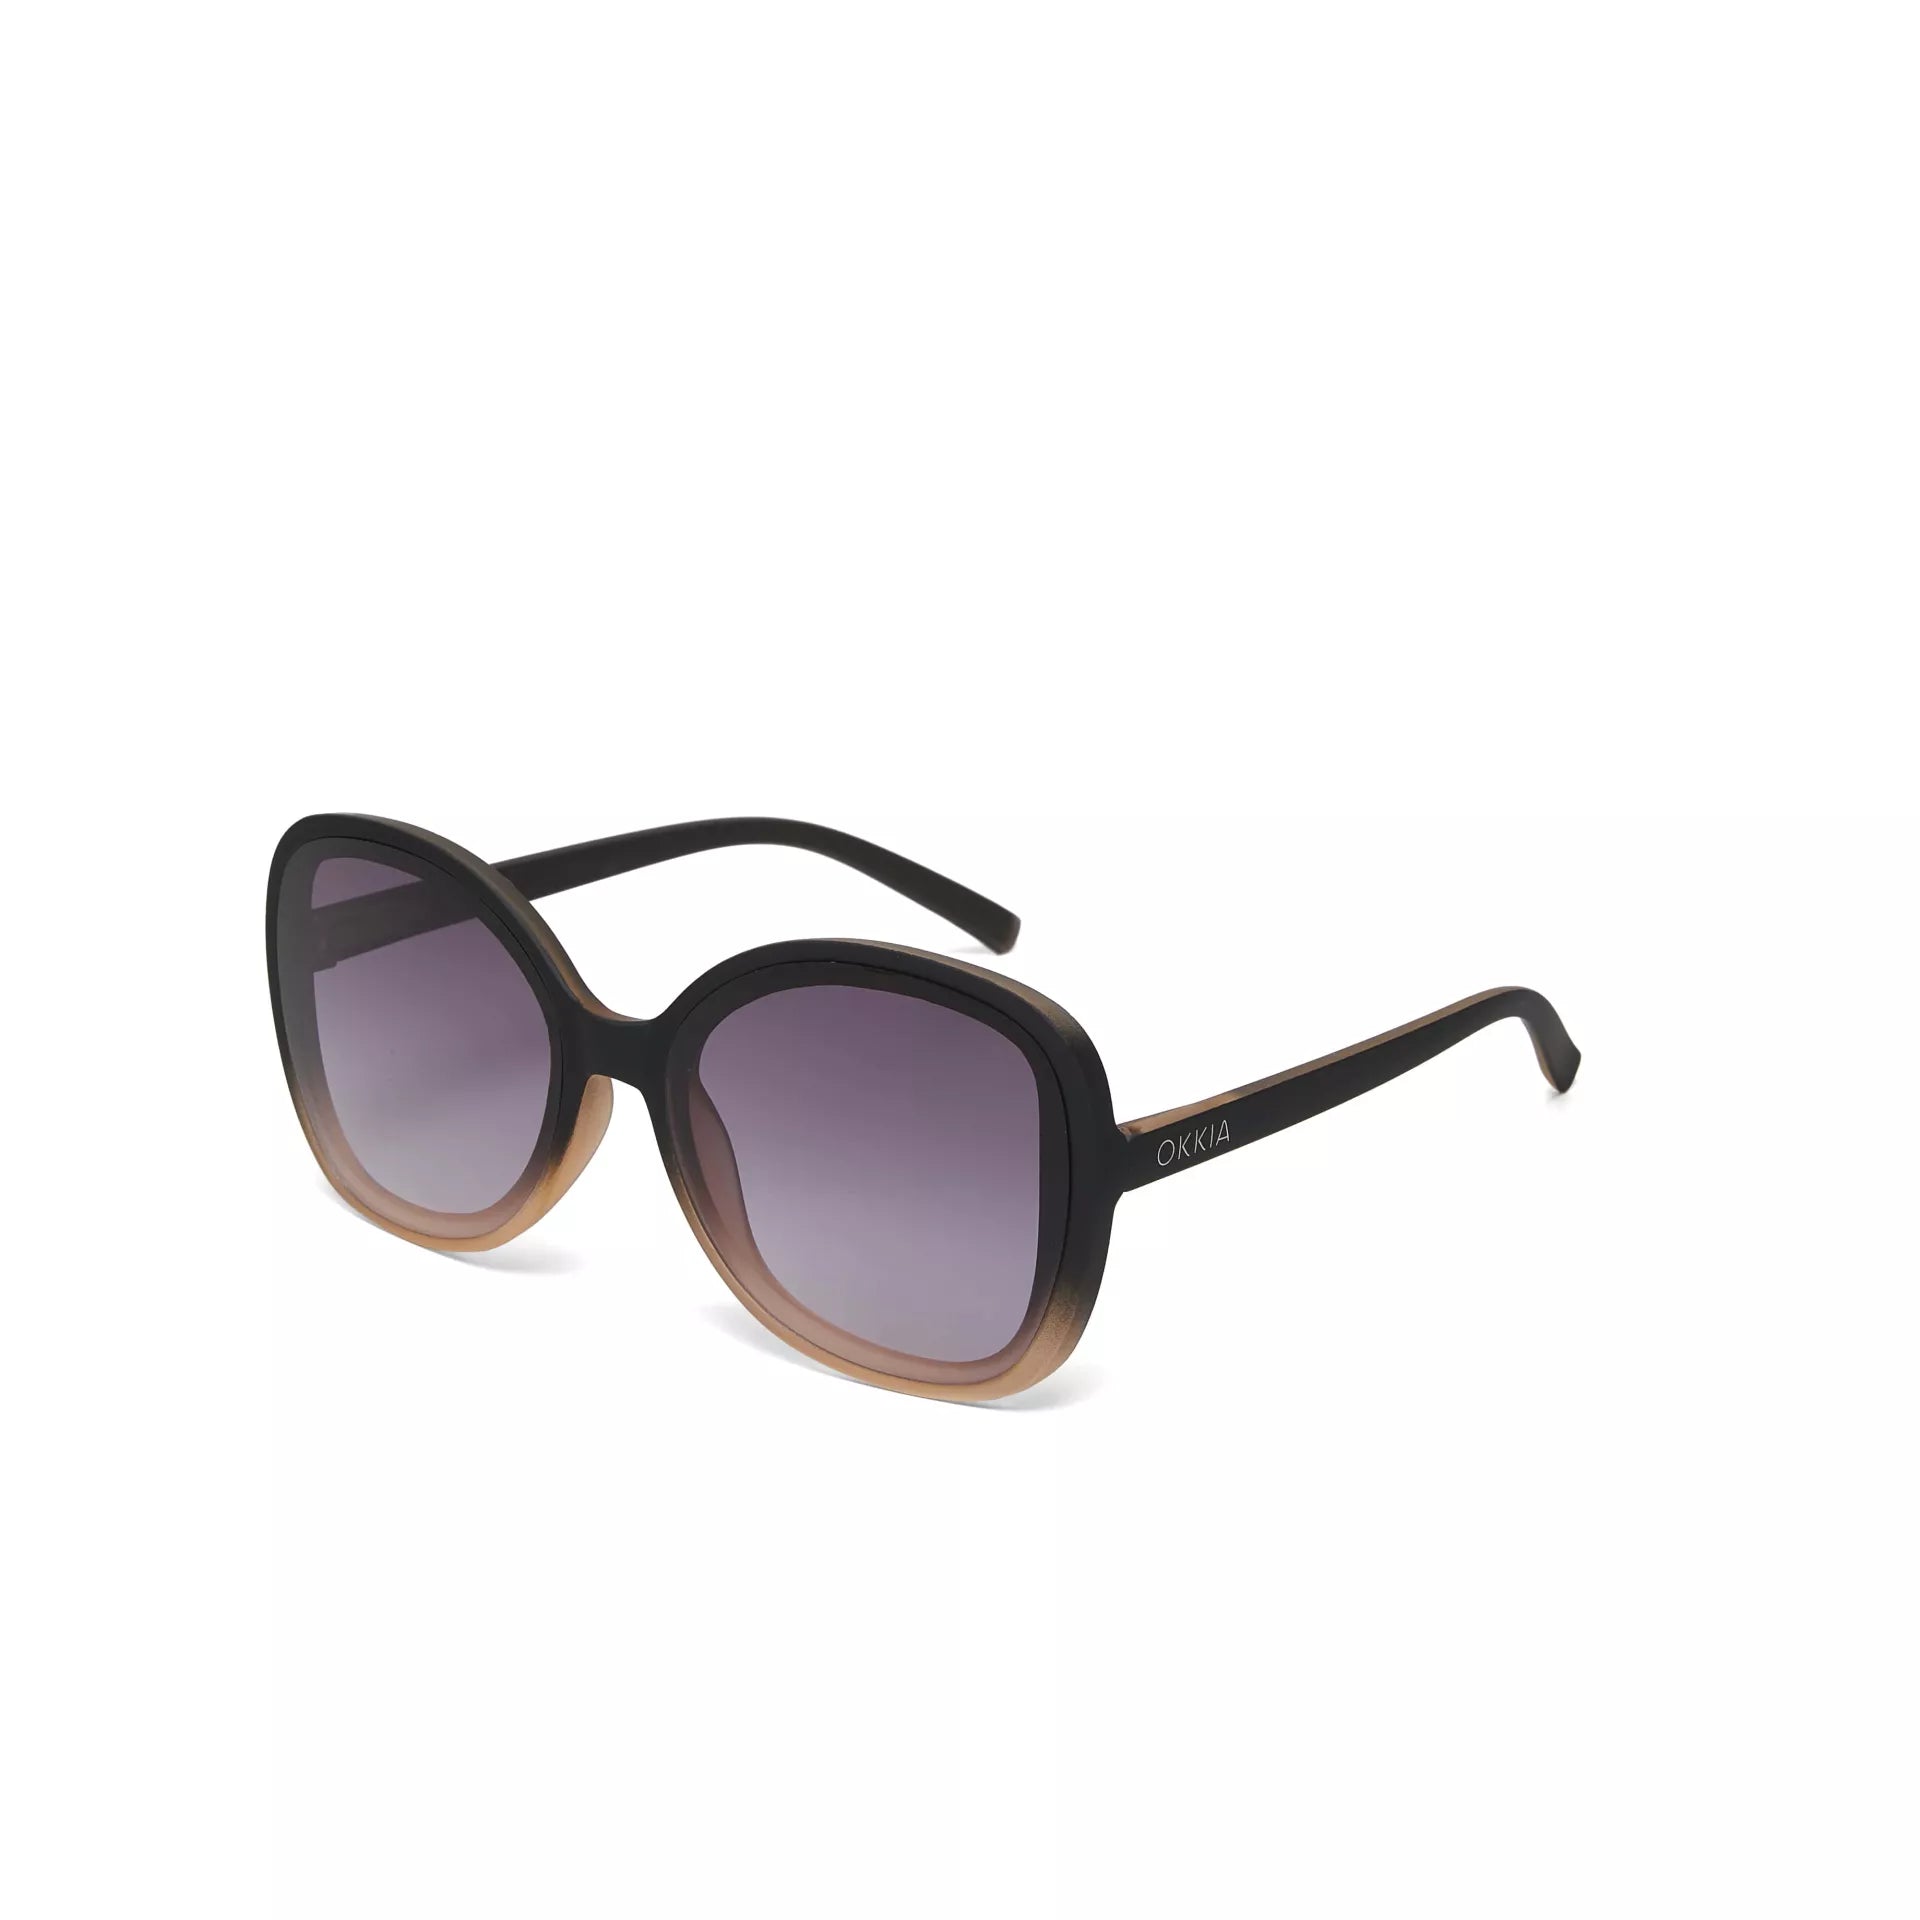 Fabulous Gifts Okkia Sunglasses Butterfly Black Pink by Weirs of Baggot Street